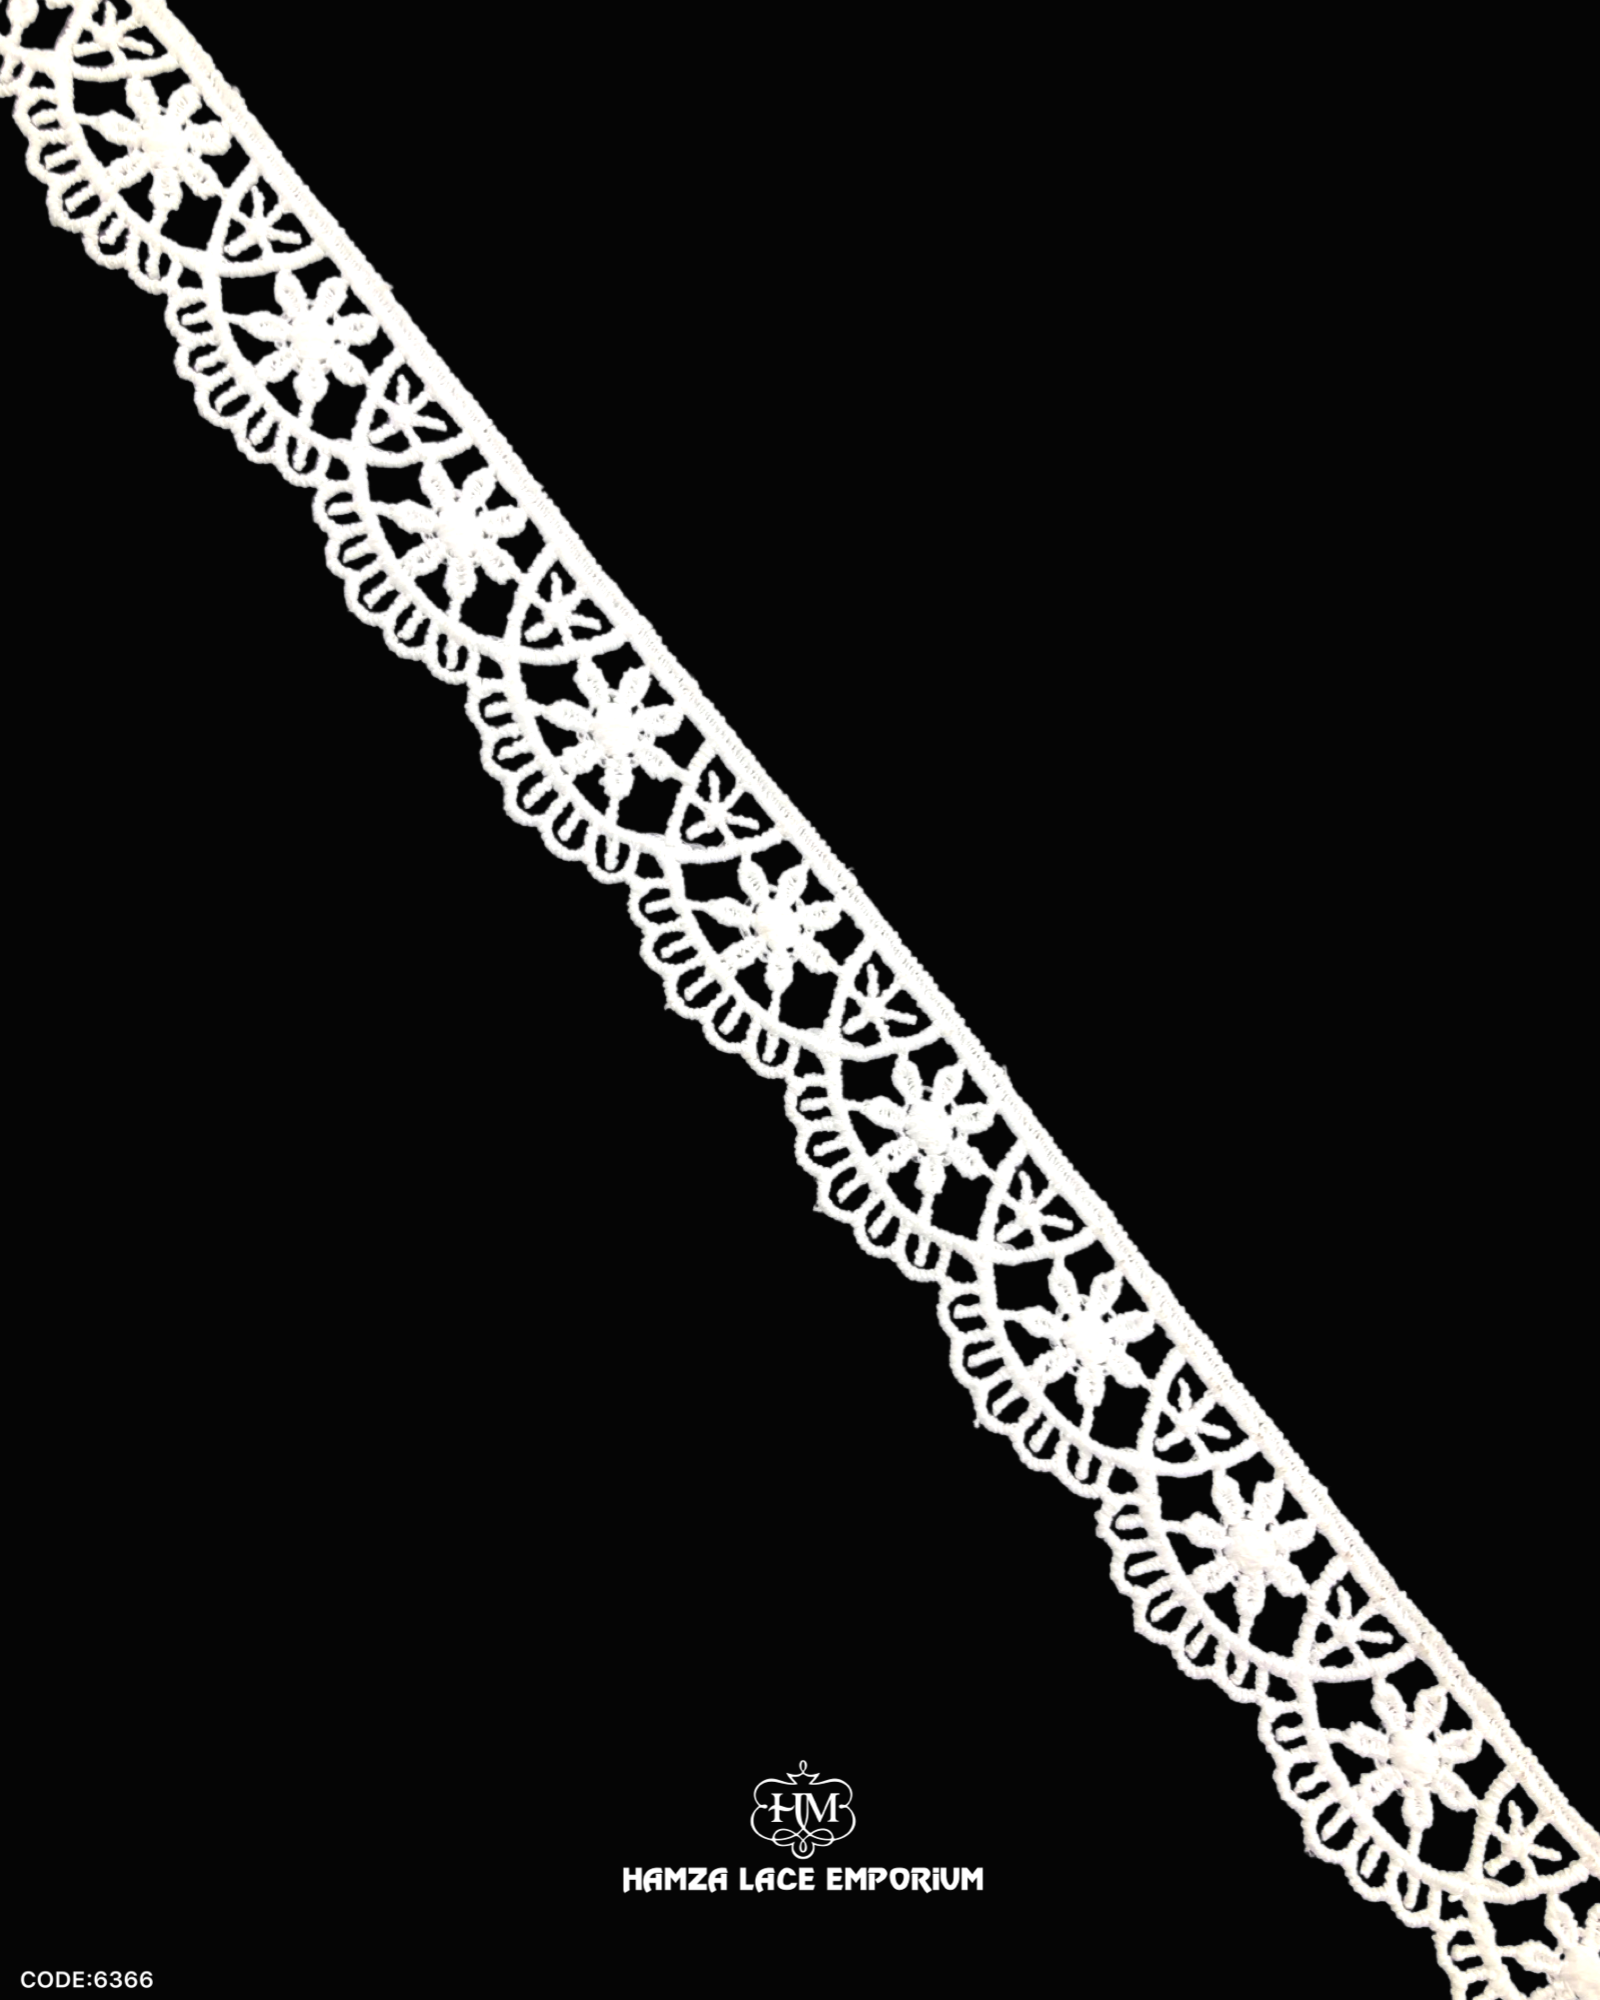 A piece of 'Edging Scallop Lace 6366' on a black background and the brand name 'Hamza Lace' and logo is printed at the bottom